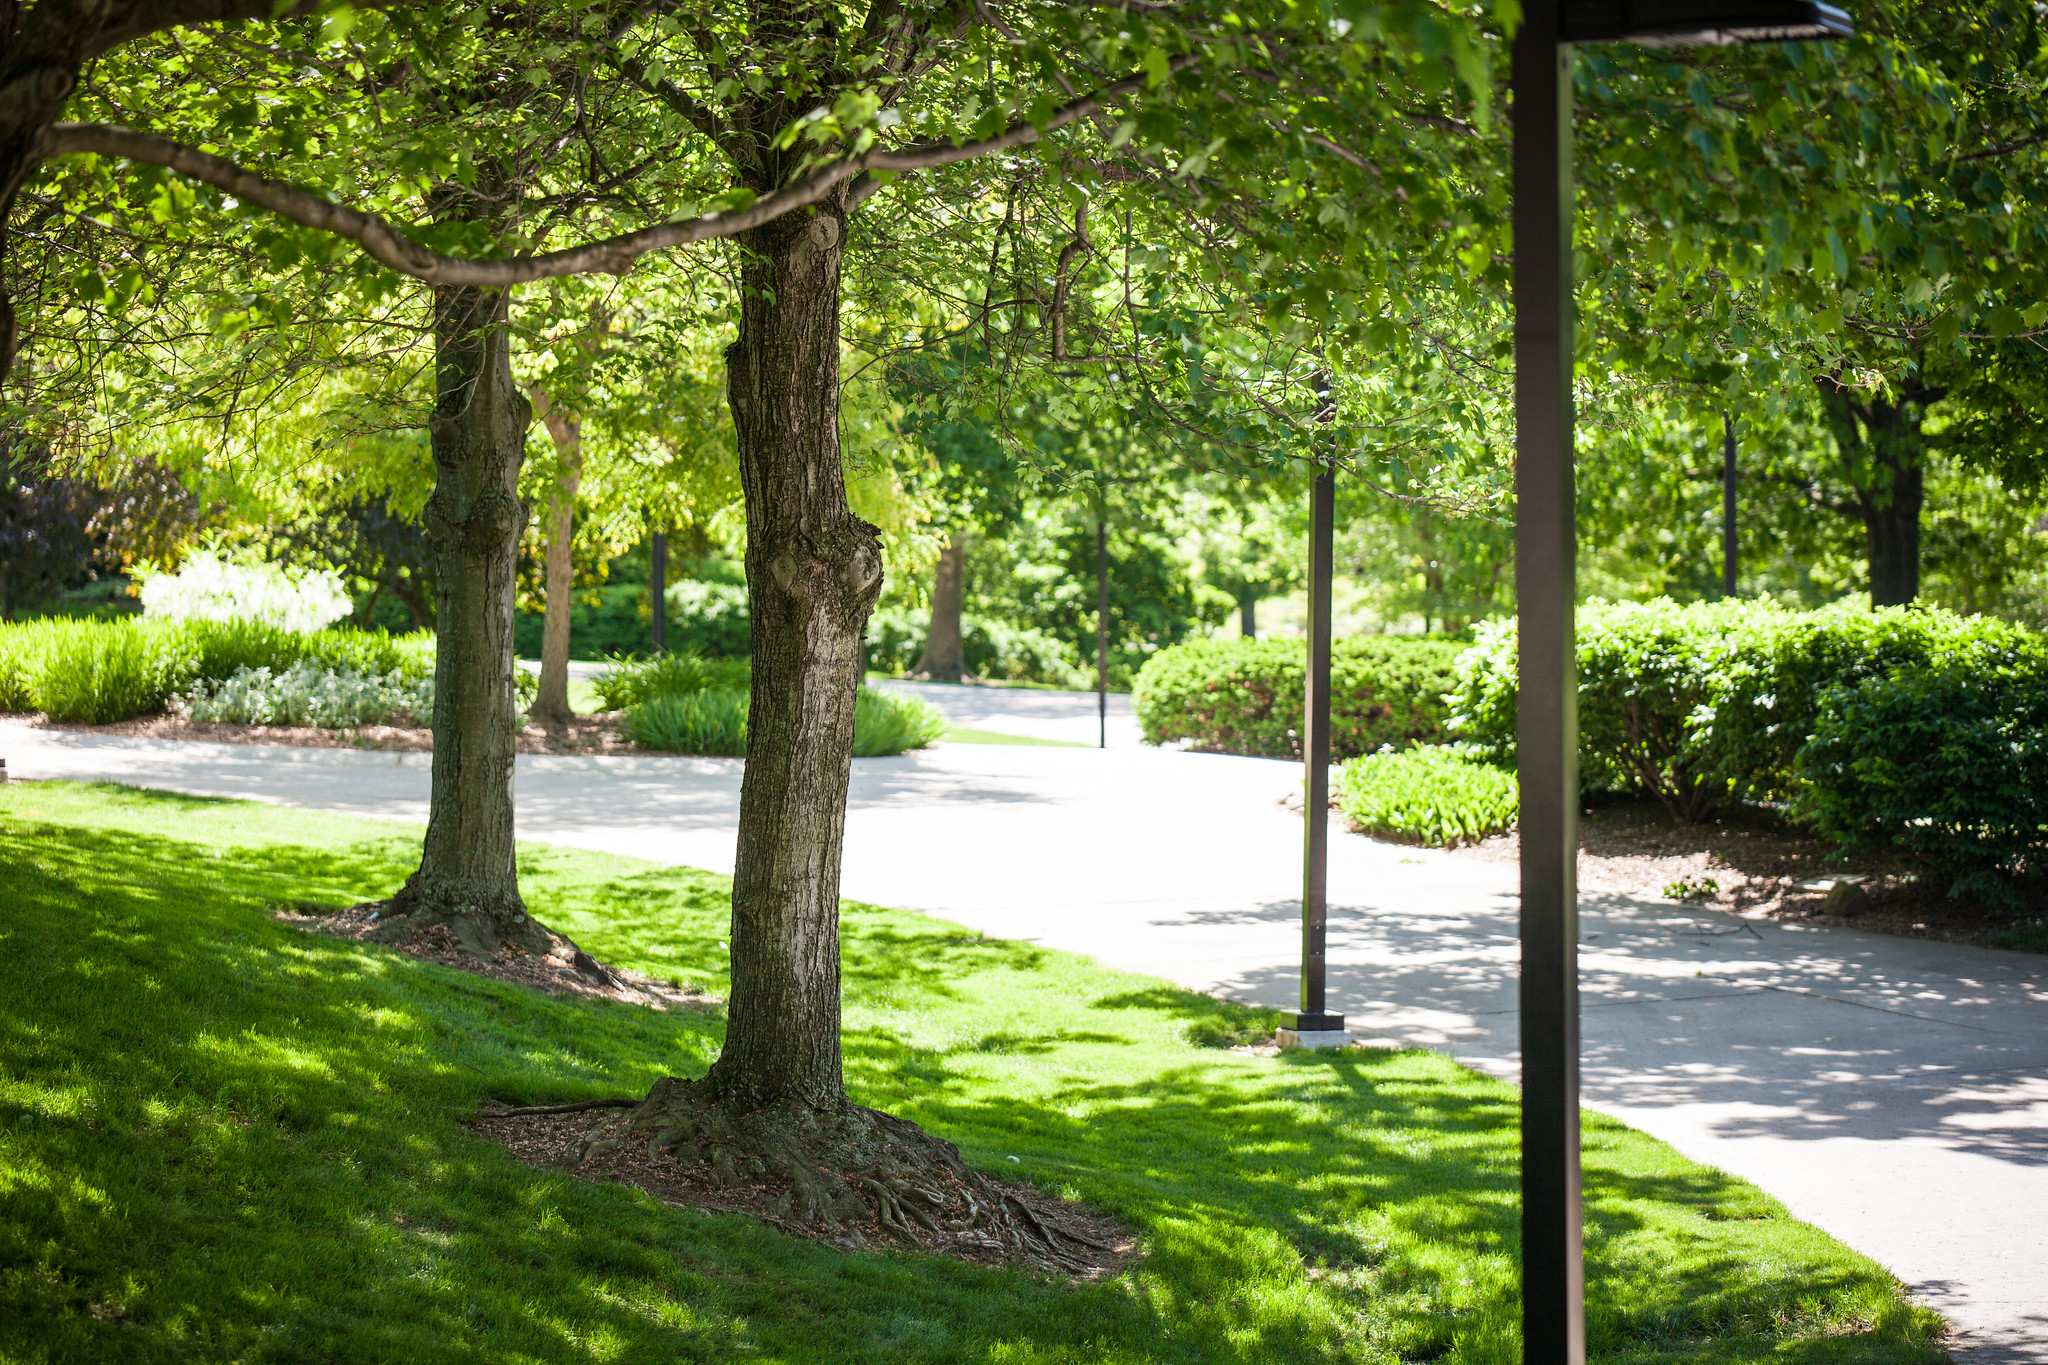 Scenic view of campus just outside of Kilcawley Center.